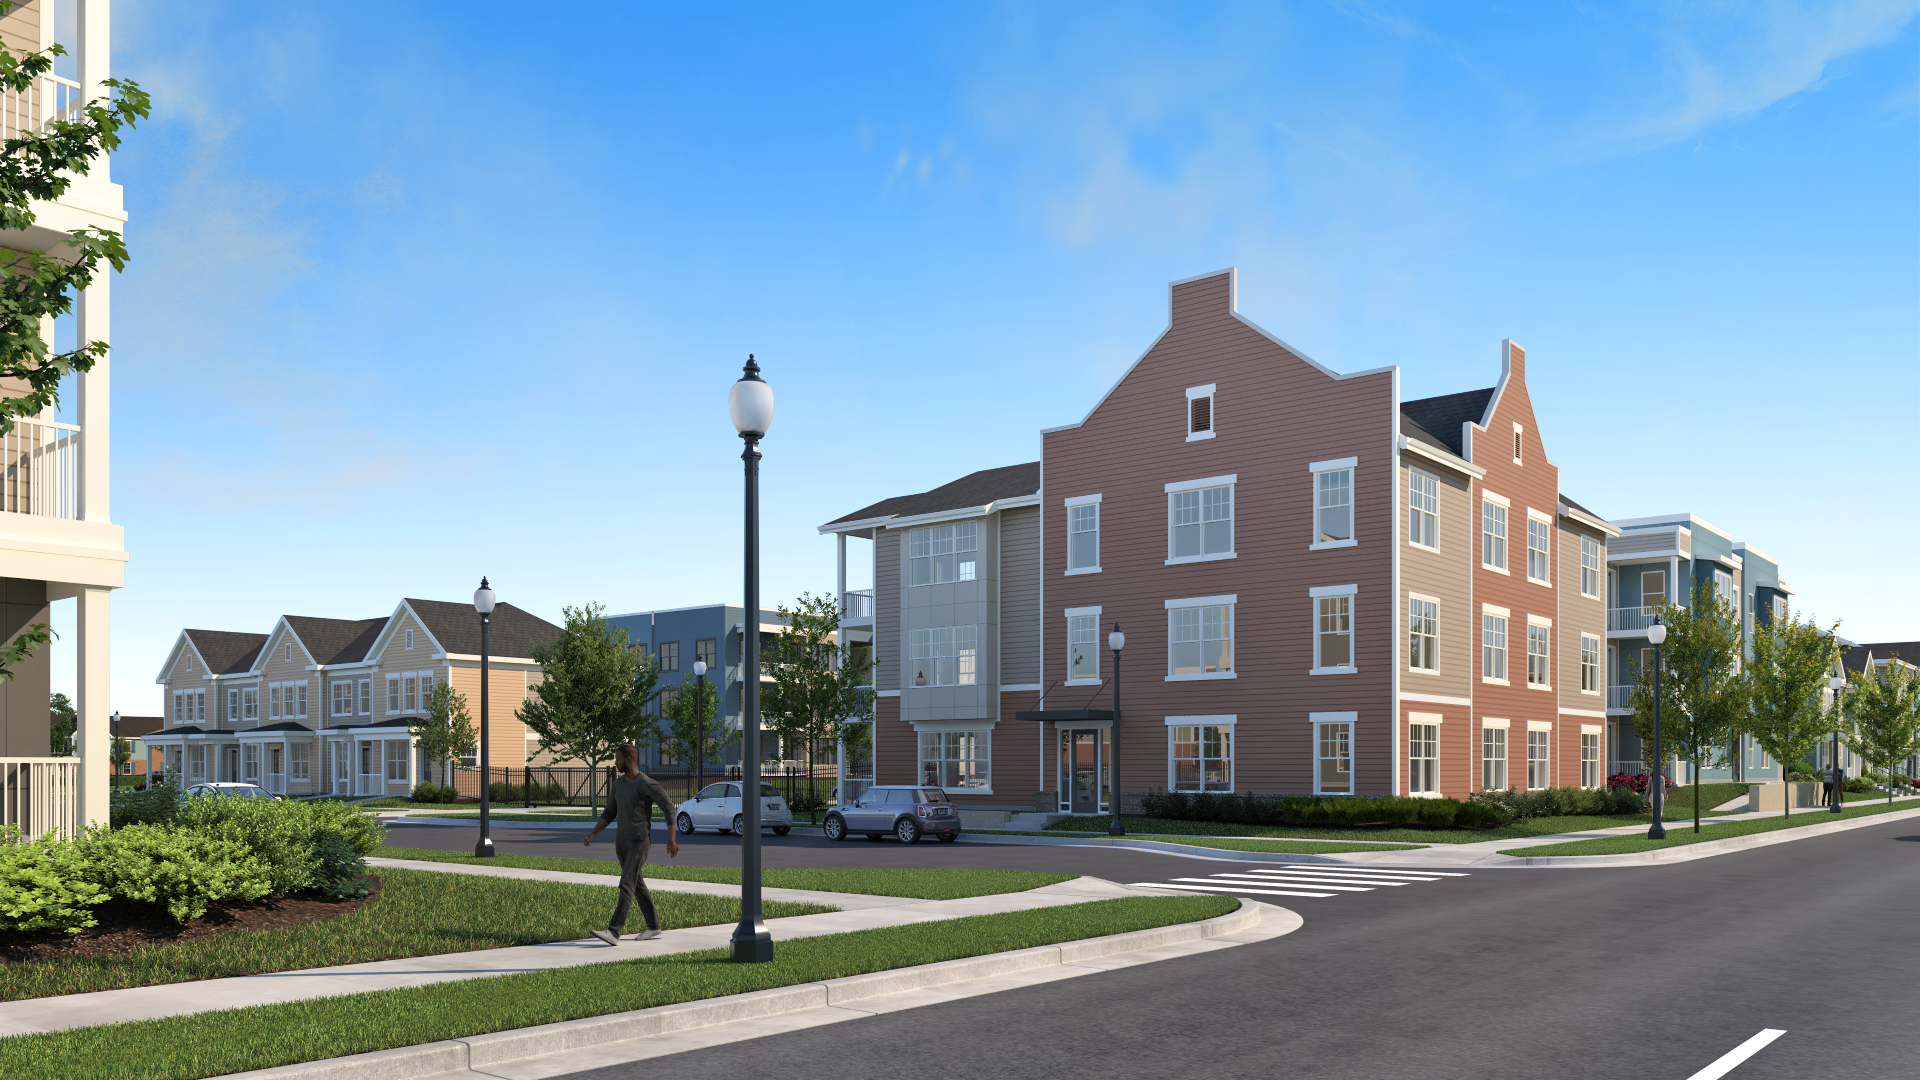 Digital rendering of corner street view of three story apartment building -Preservation Square